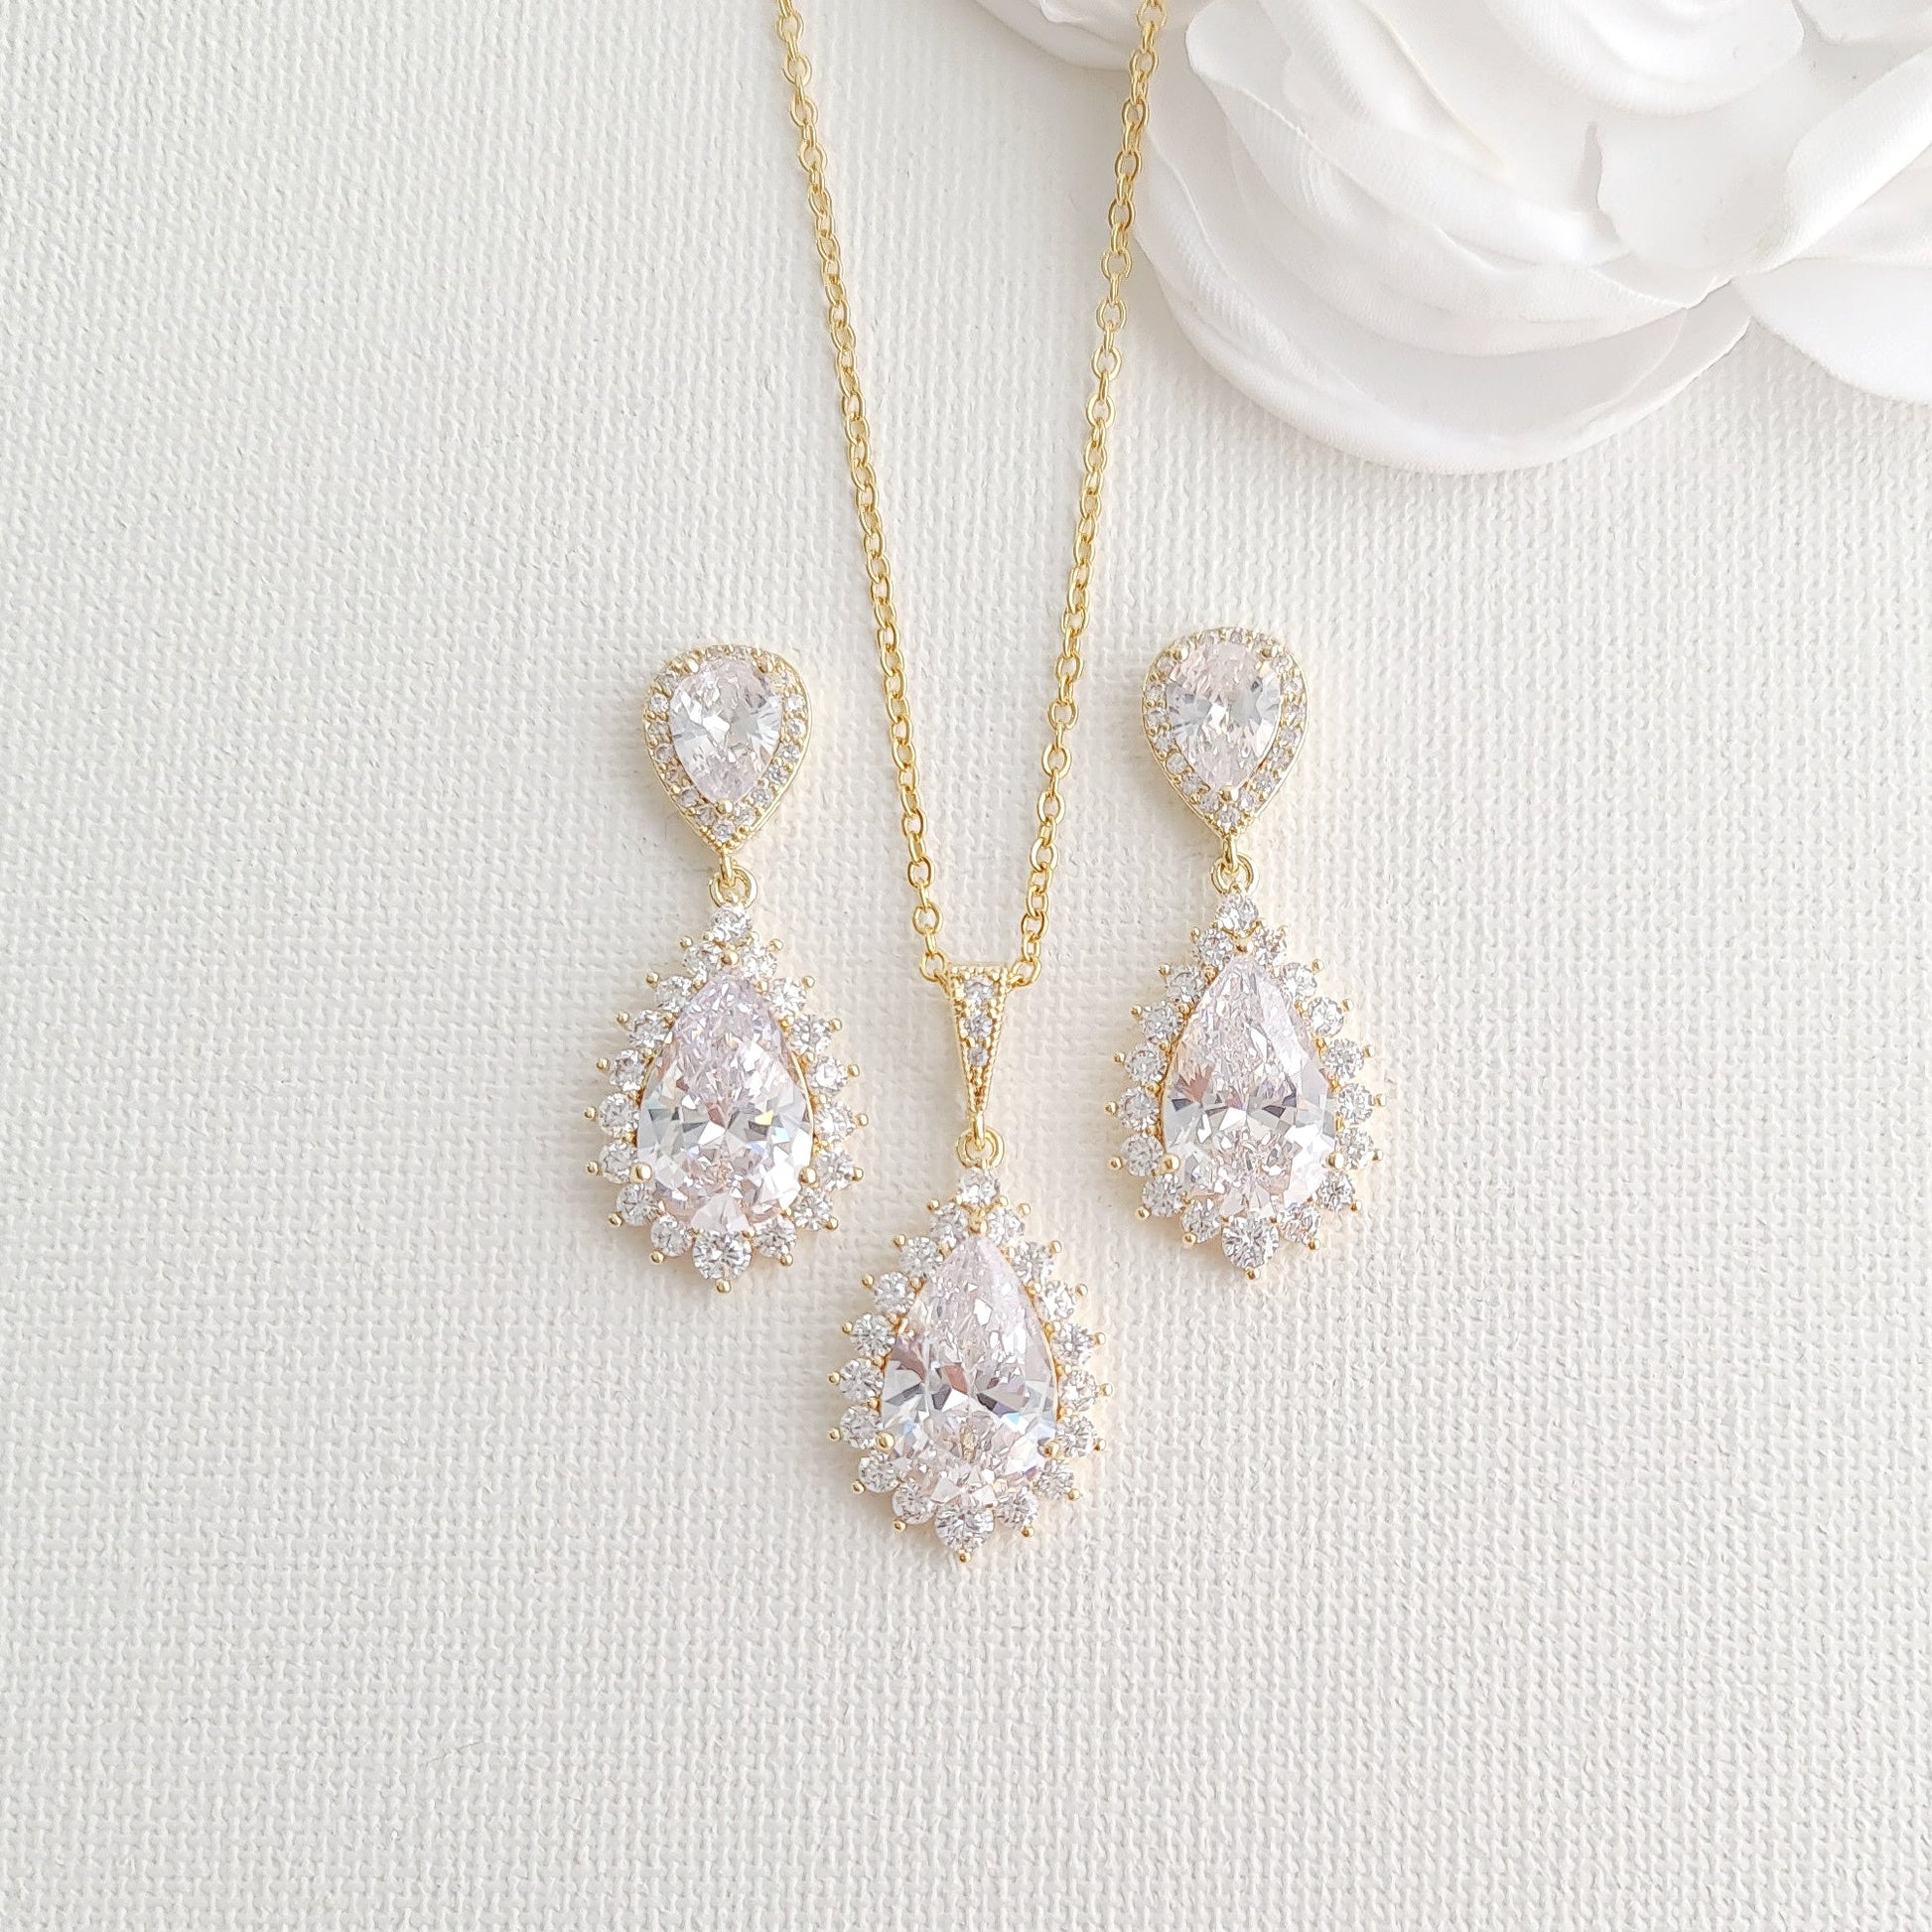 gold earring and necklace set